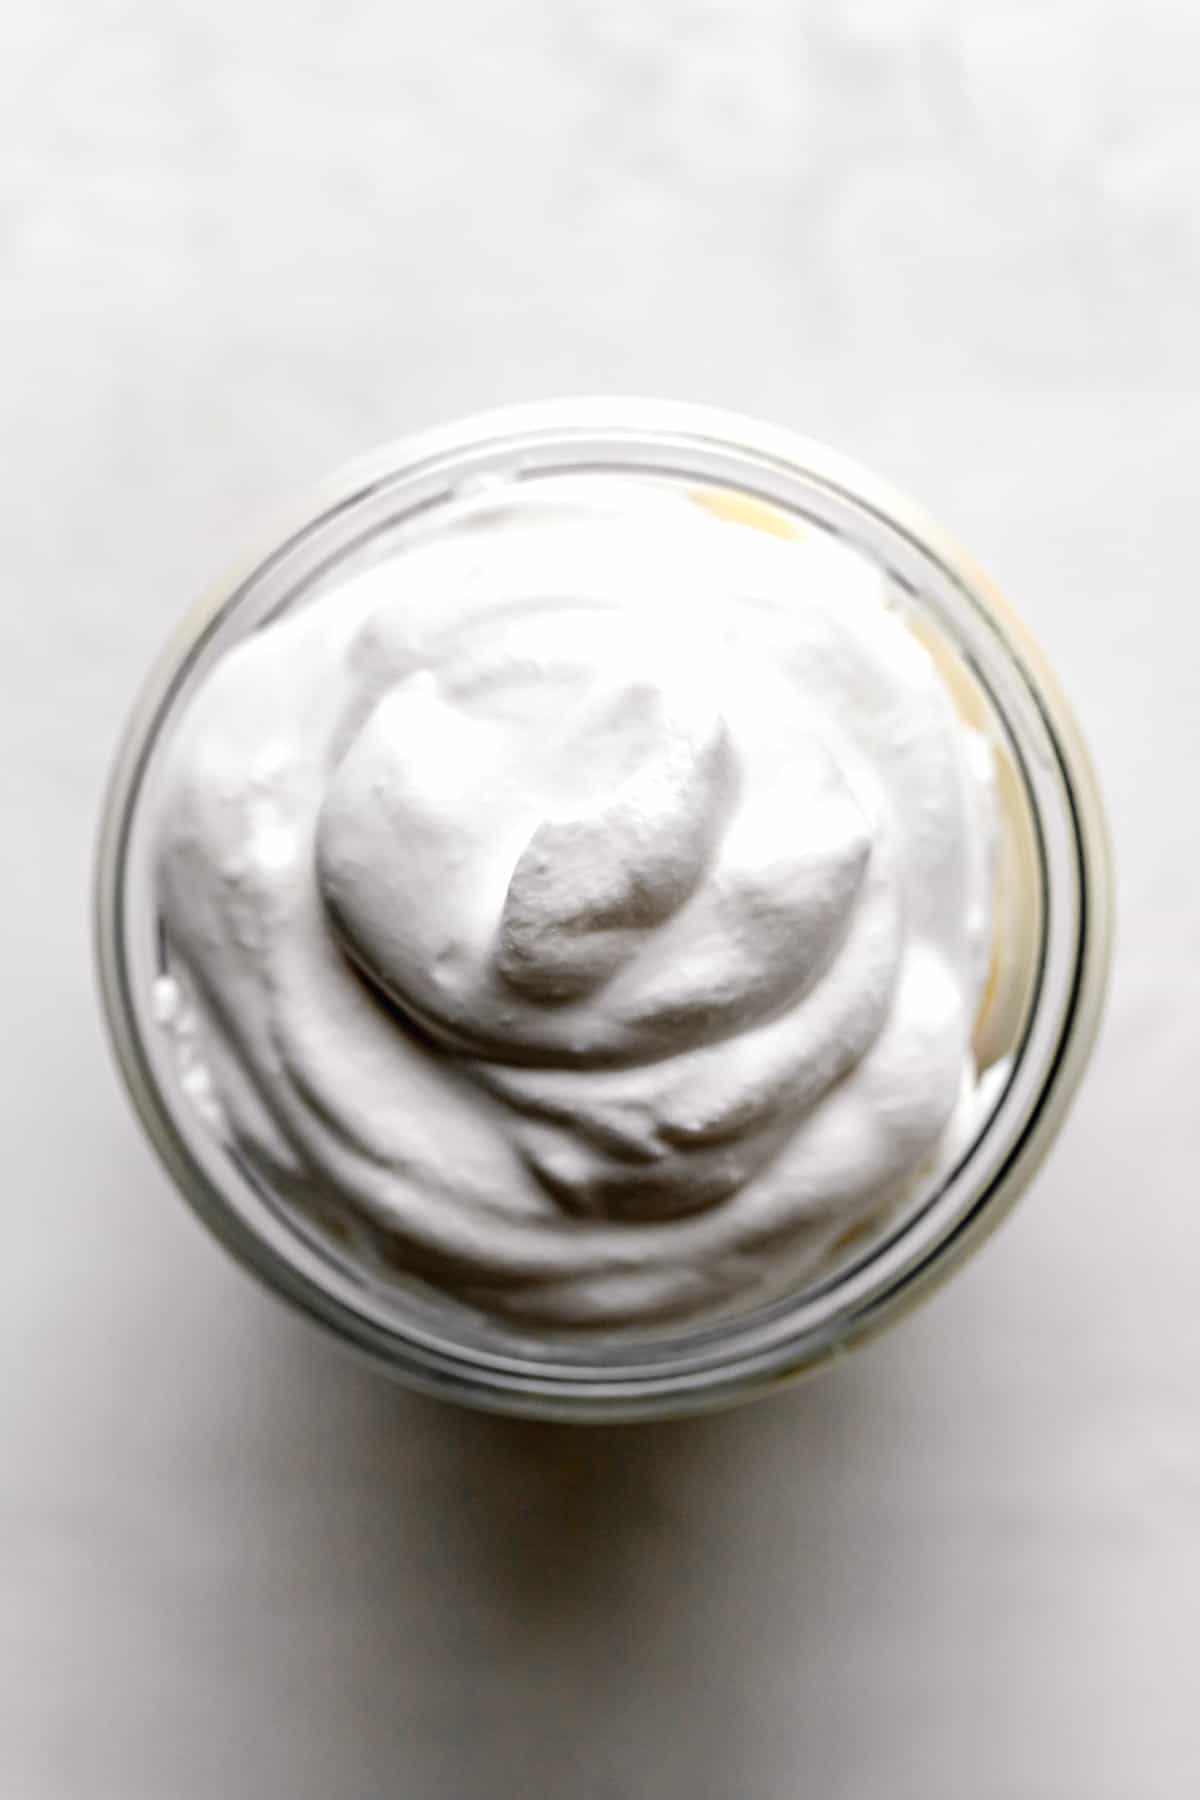 whipped cream layer added in jar.